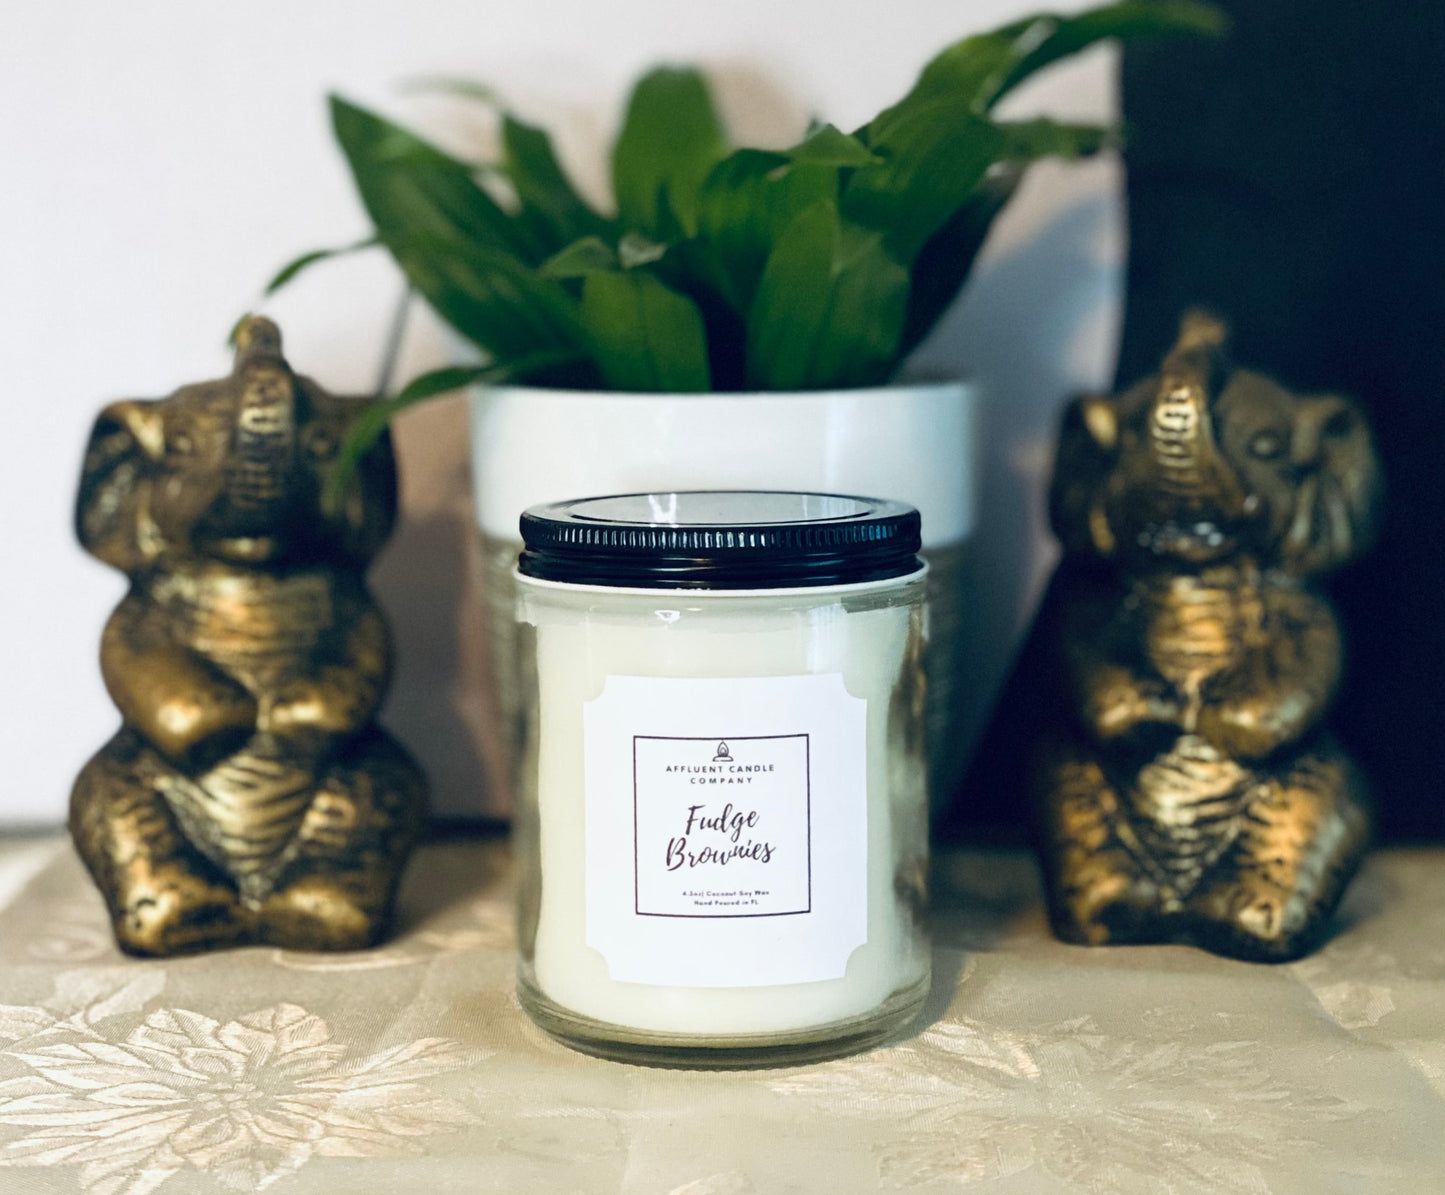 Bakery Scented candle